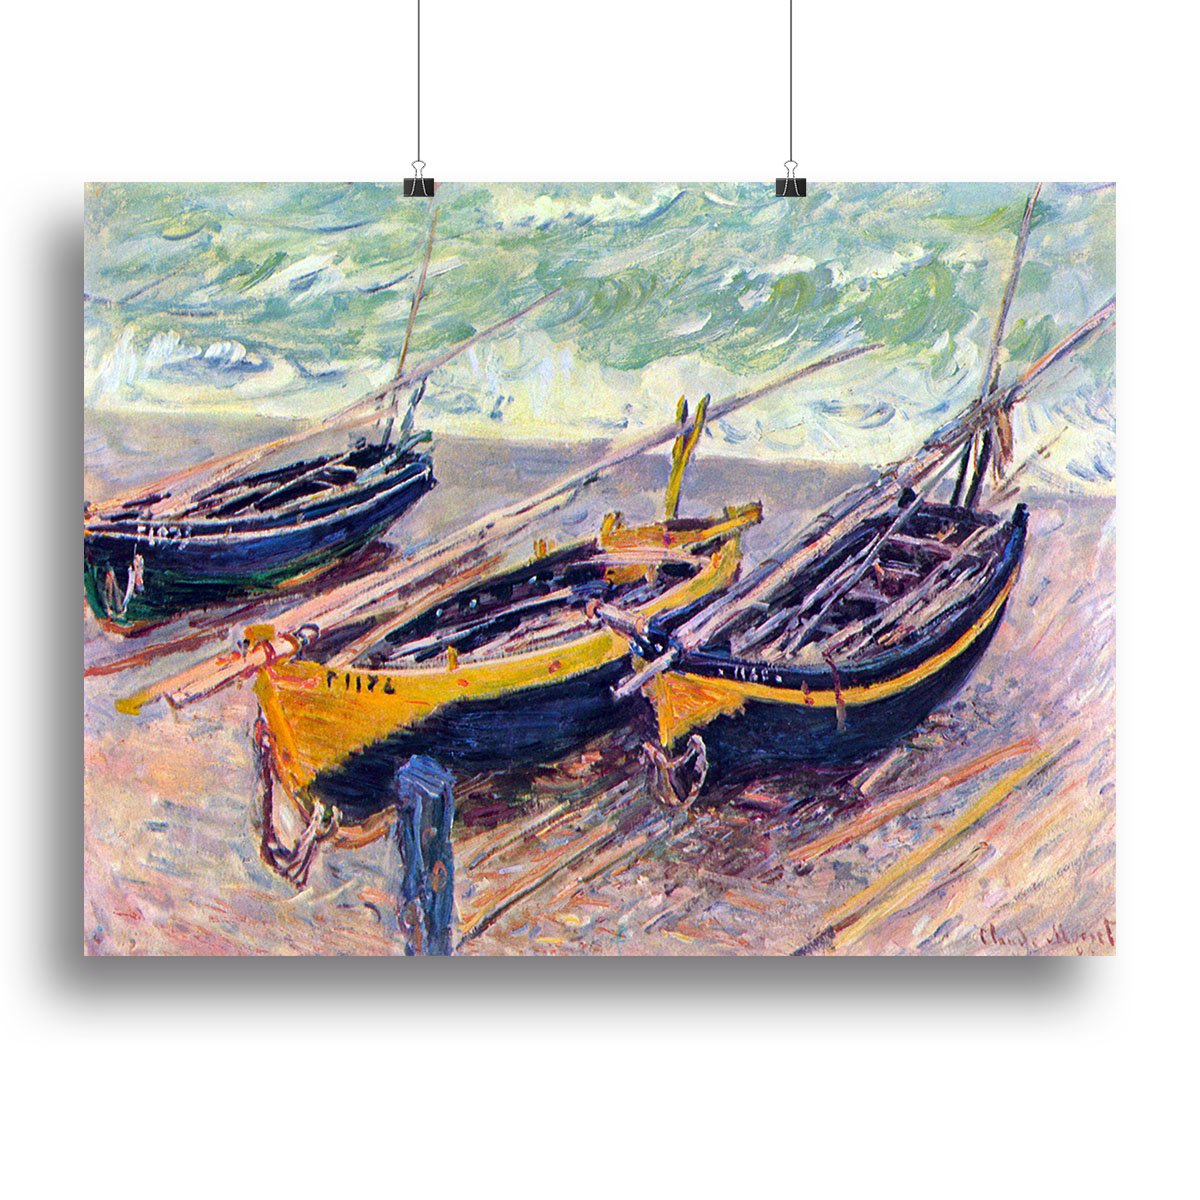 Dock of etretat three fishing boats by Monet Canvas Print or Poster